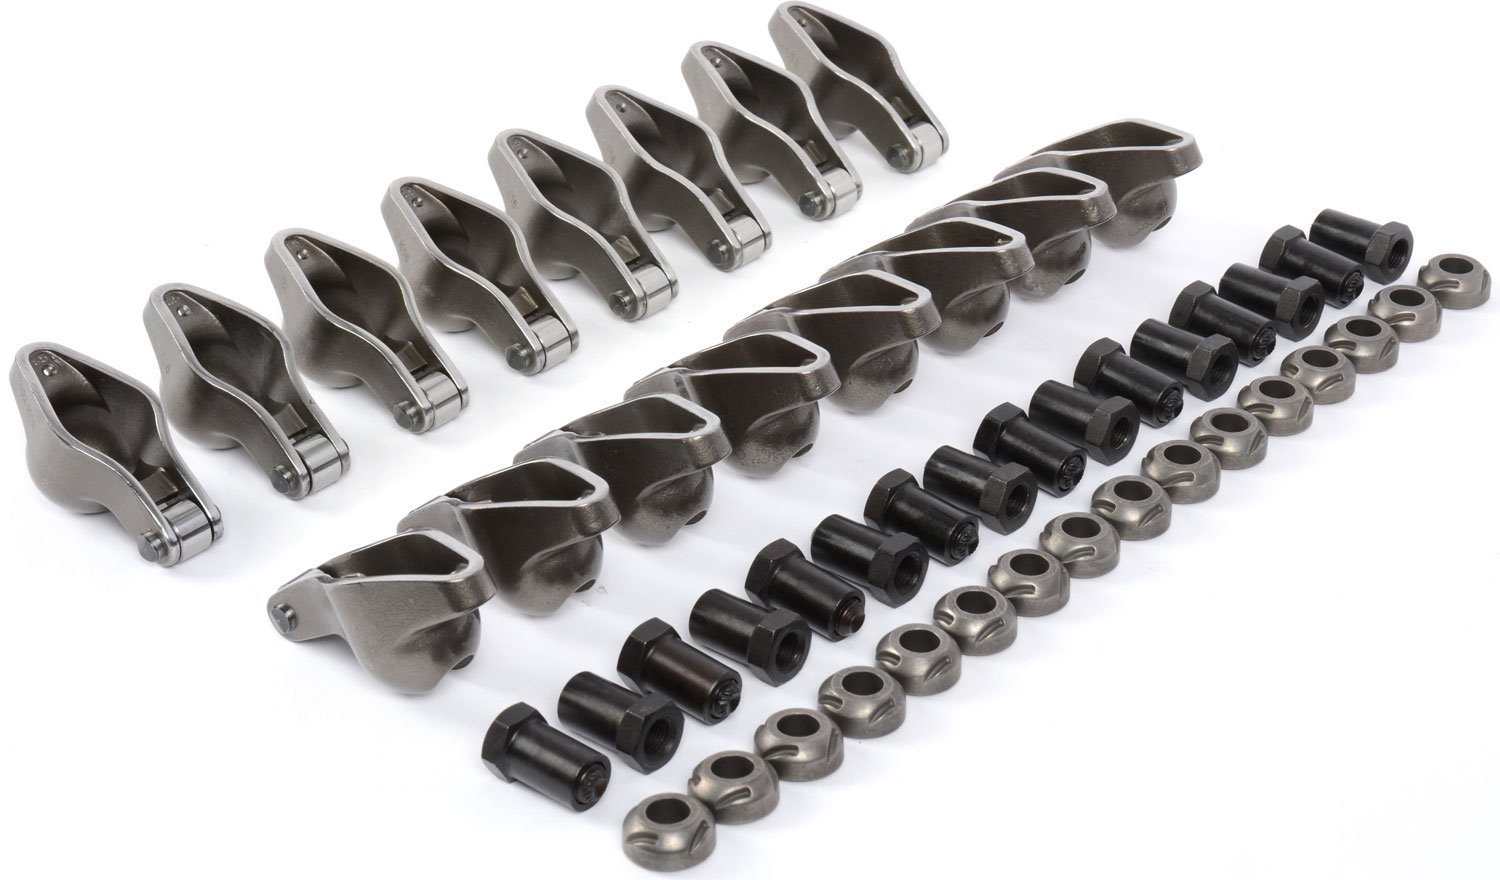 Cast Steel Roller Tip Rocker Arms for 1955-1986 Small Block Chevy [1.5 Ratio for 3/8 in. Studs]